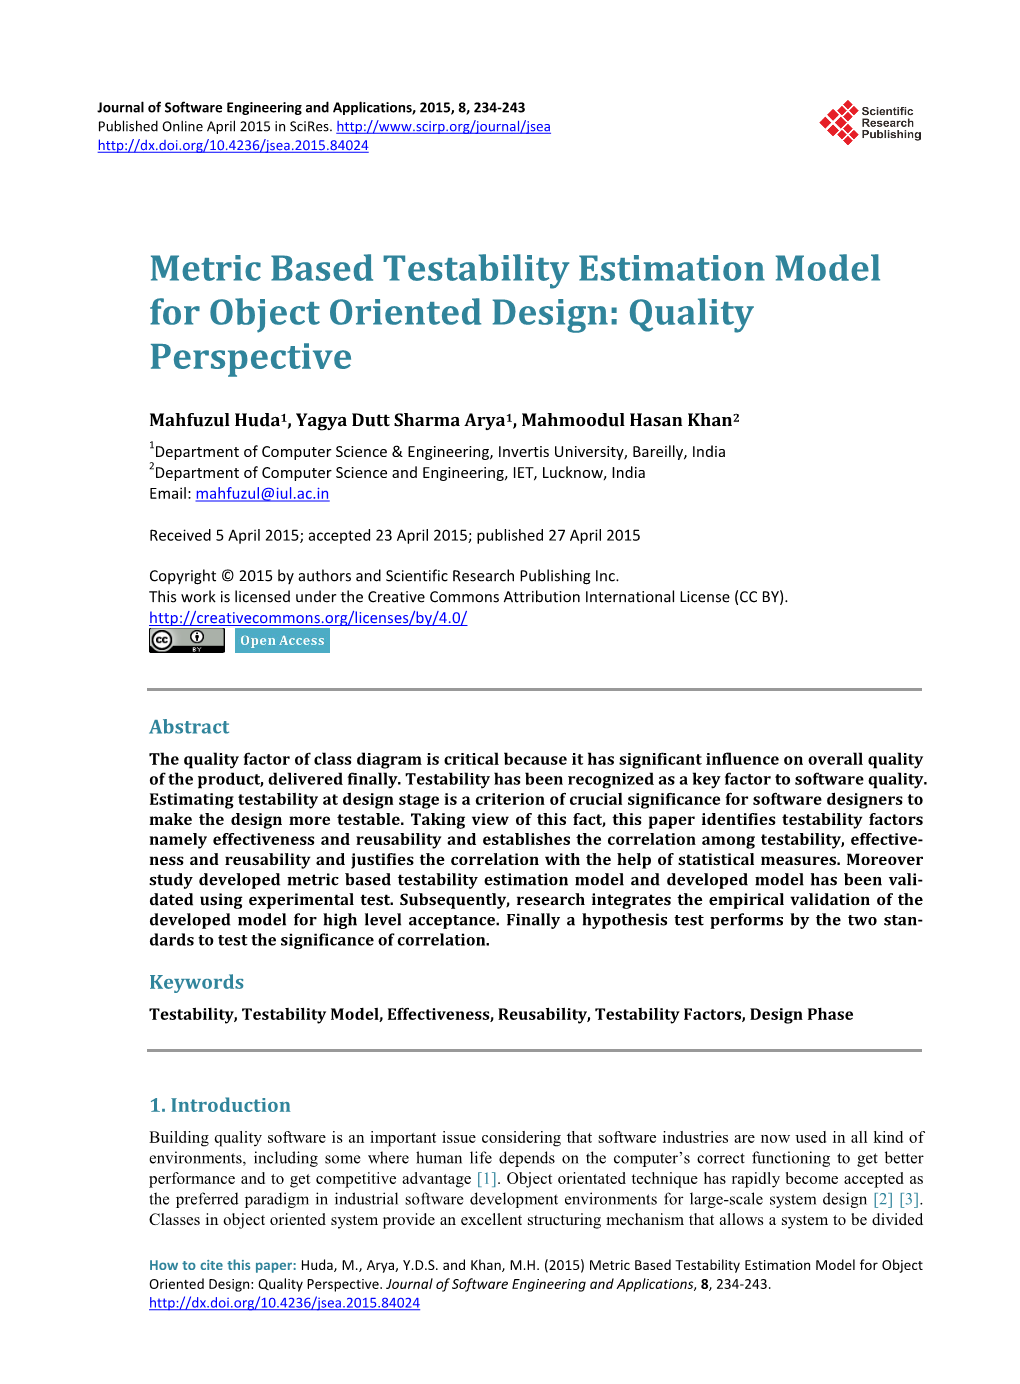 Metric Based Testability Estimation Model for Object Oriented Design: Quality Perspective